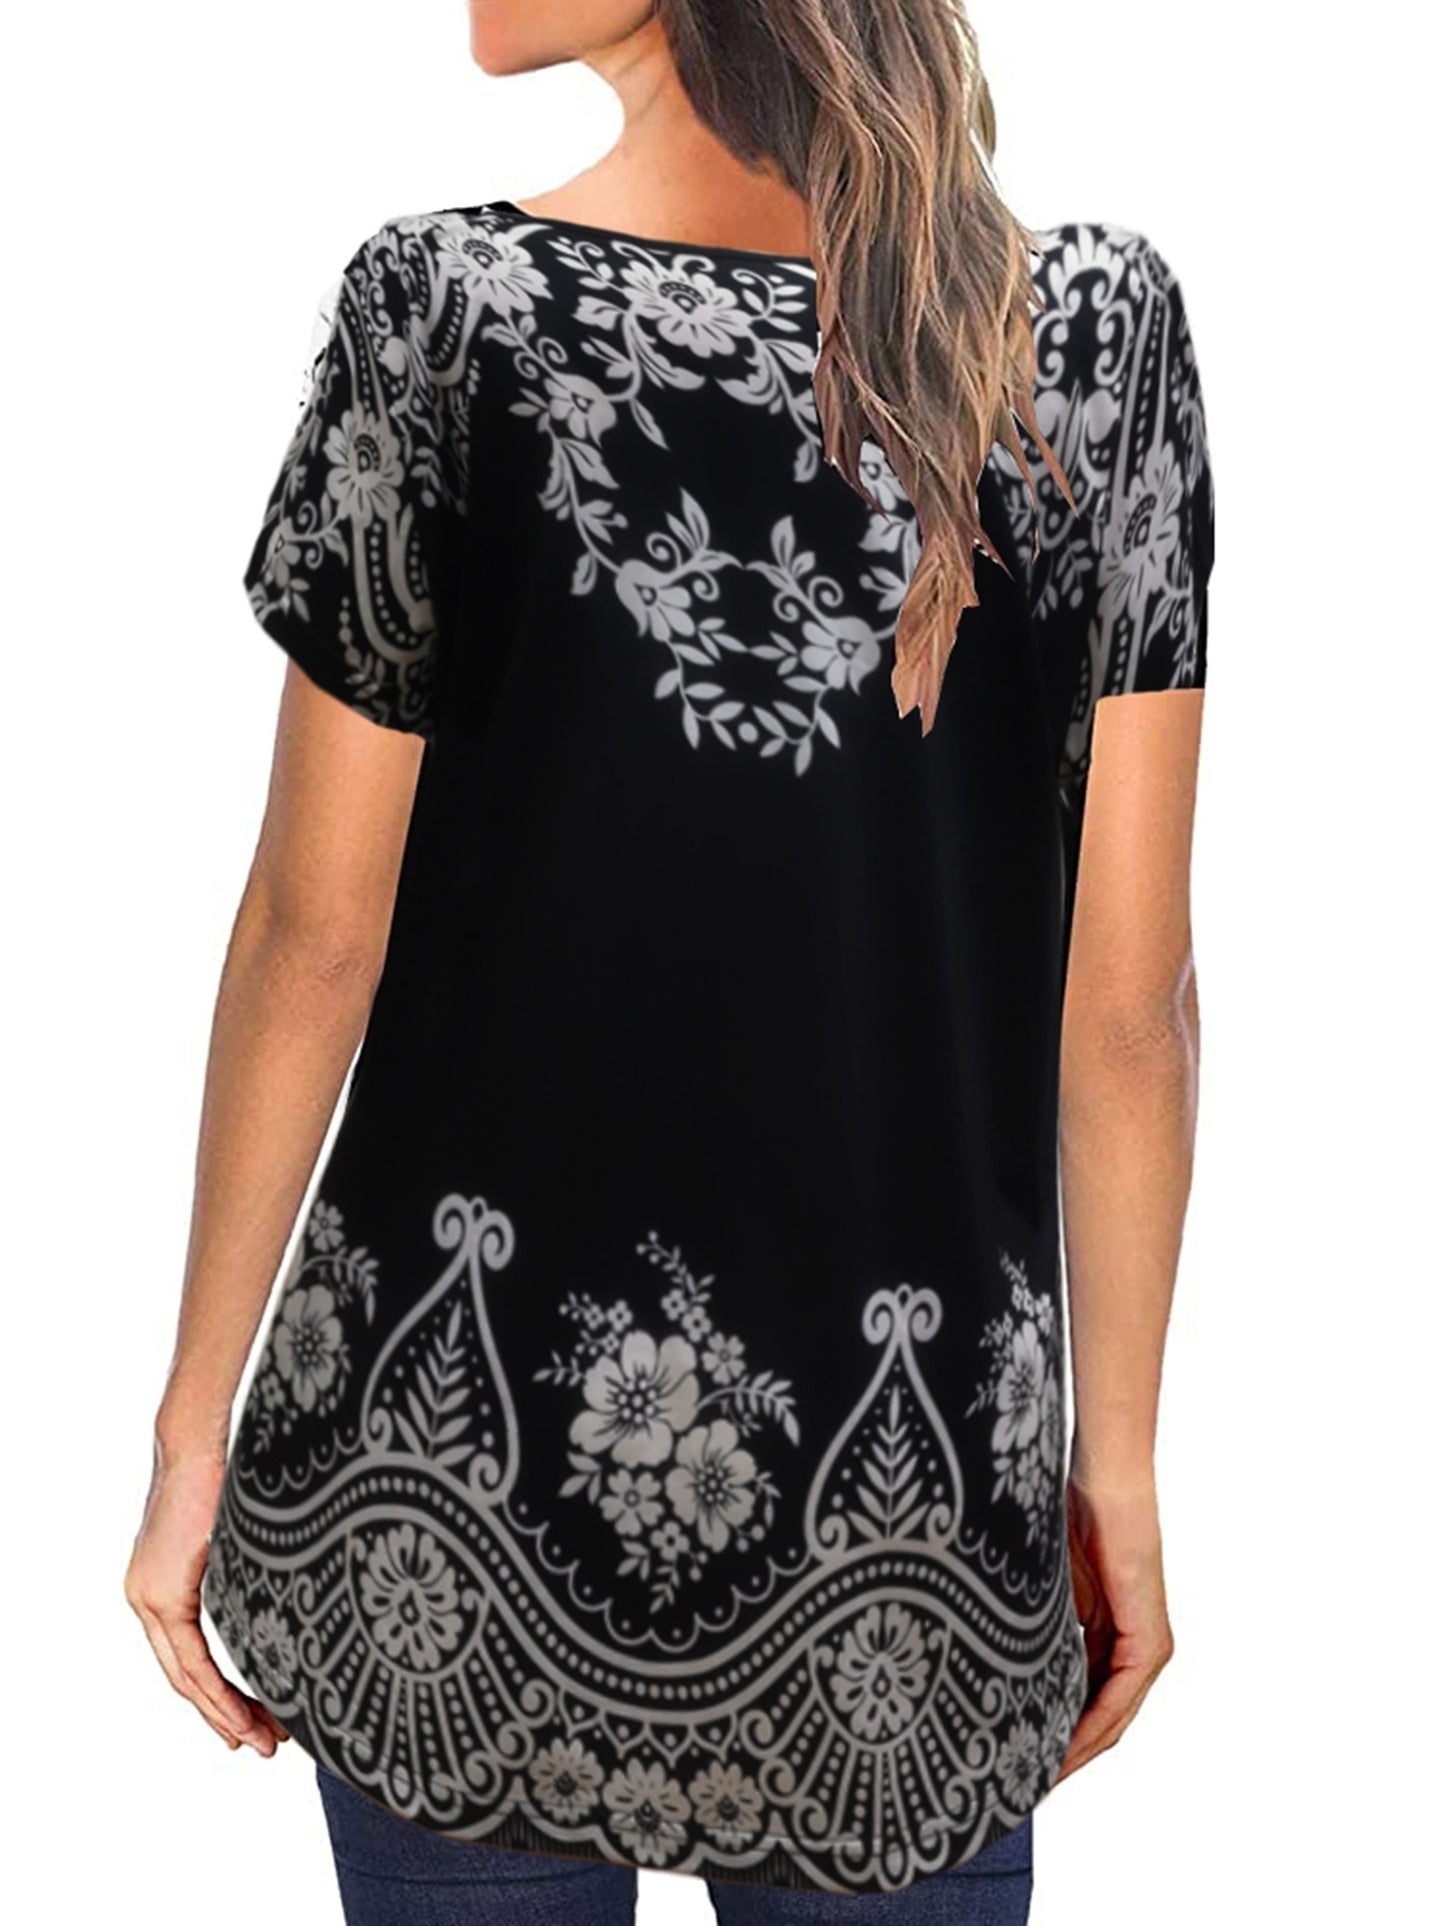 Vzyzv Women's Plus Size Boho Floral Print T-Shirt - Soft and Stretchy Short Sleeve Round Neck Tee